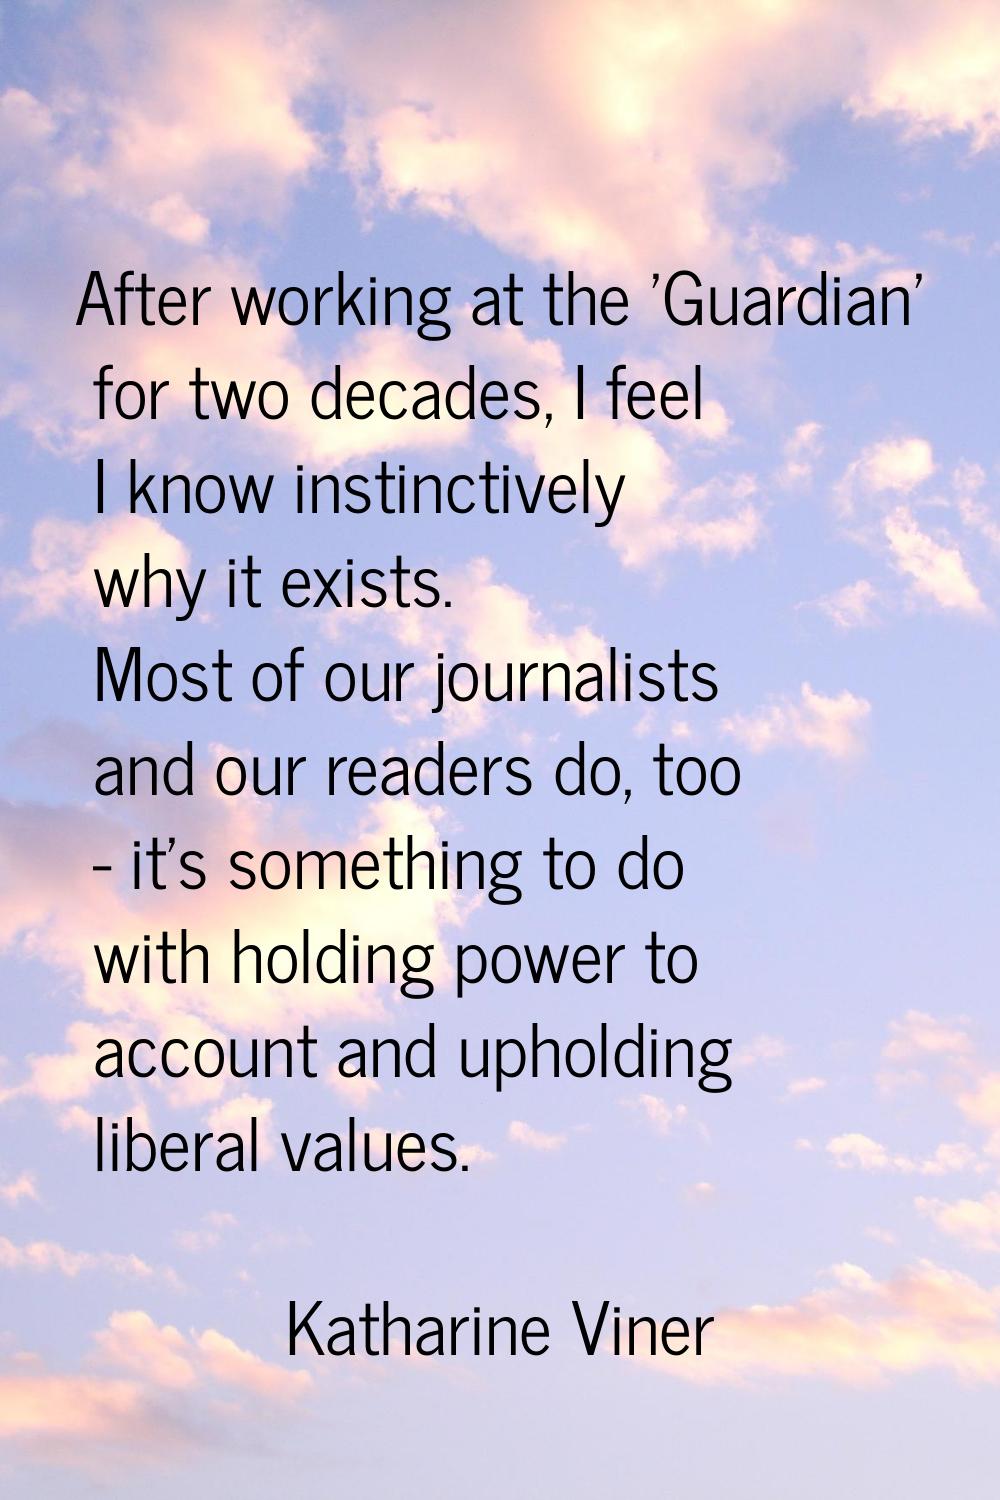 After working at the 'Guardian' for two decades, I feel I know instinctively why it exists. Most of